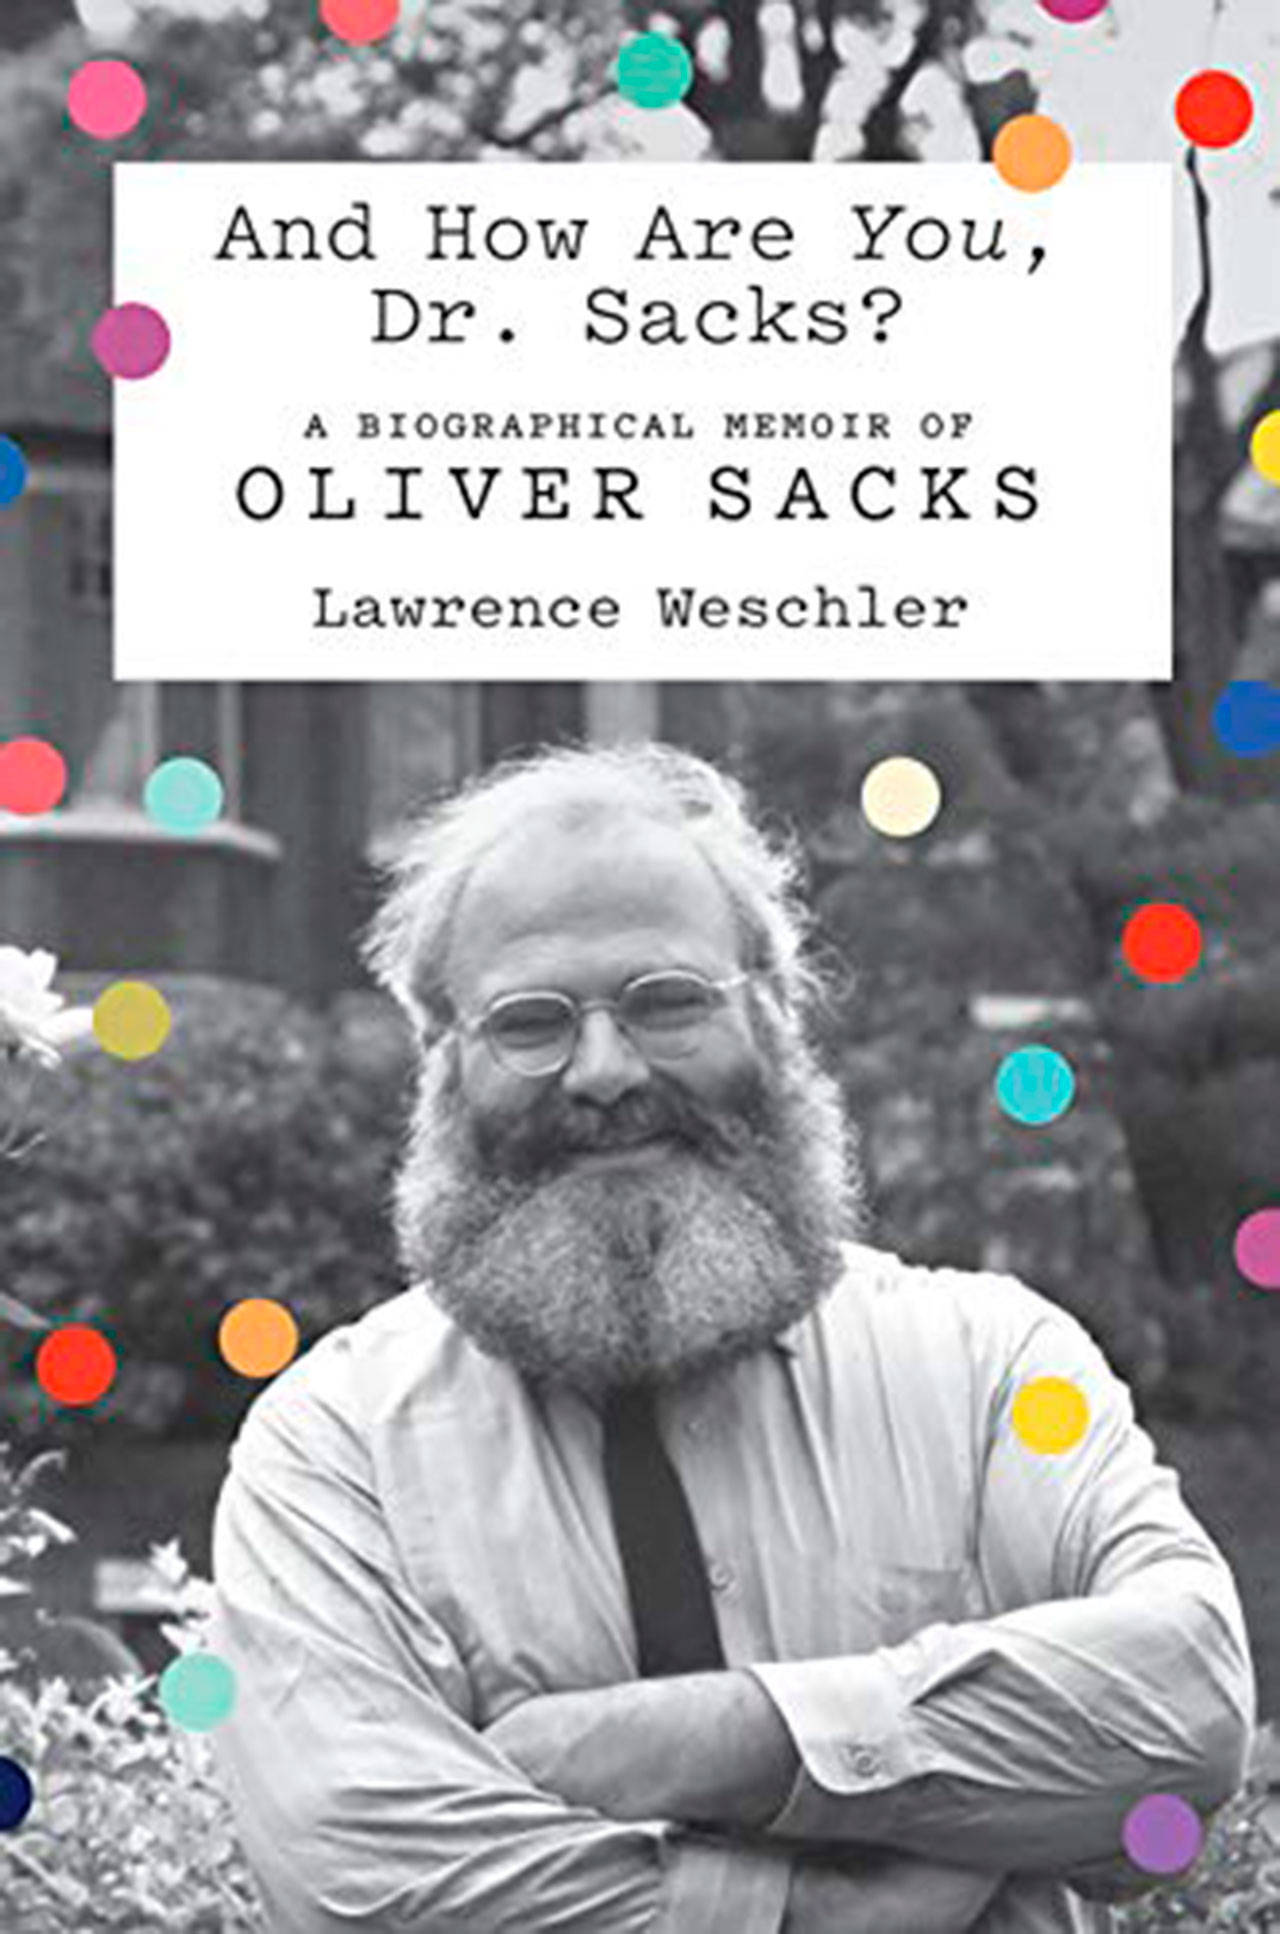 Image courtesy of Eagle Harbor Book Company | Award-winning journalist and author Lawrence Weschler will visit Eagle Harbor Book Company to talk about his new book “And How Are You, Dr. Sacks? A Biographical Memoir of Oliver Sacks” at 7 p.m. Thursday, Oct. 10.